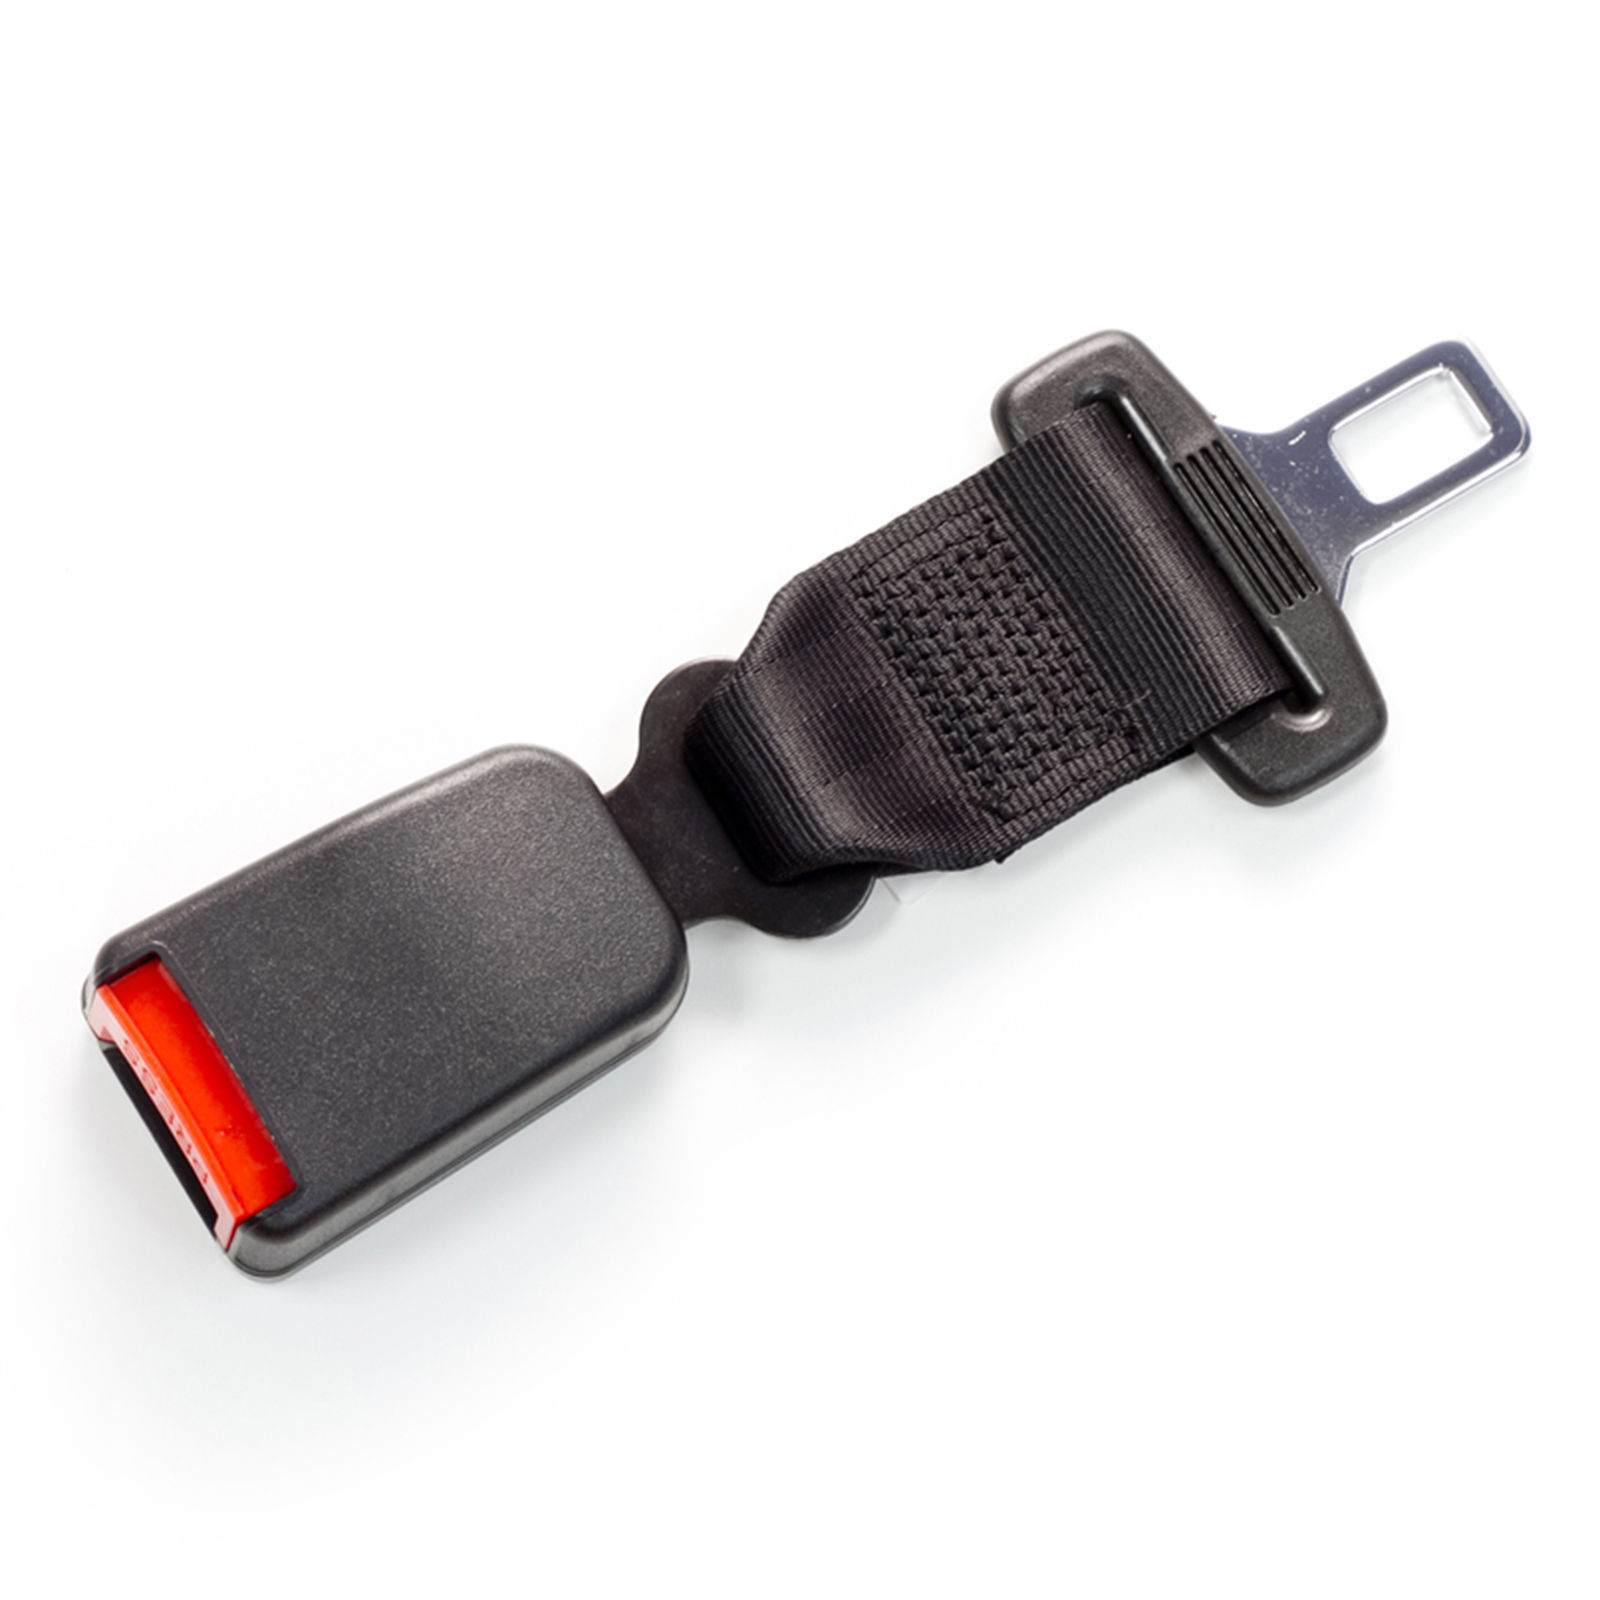 7 Seat Belt Extender - E4 Safety Certified - Black, A - Click & Go - SHIPS FREE